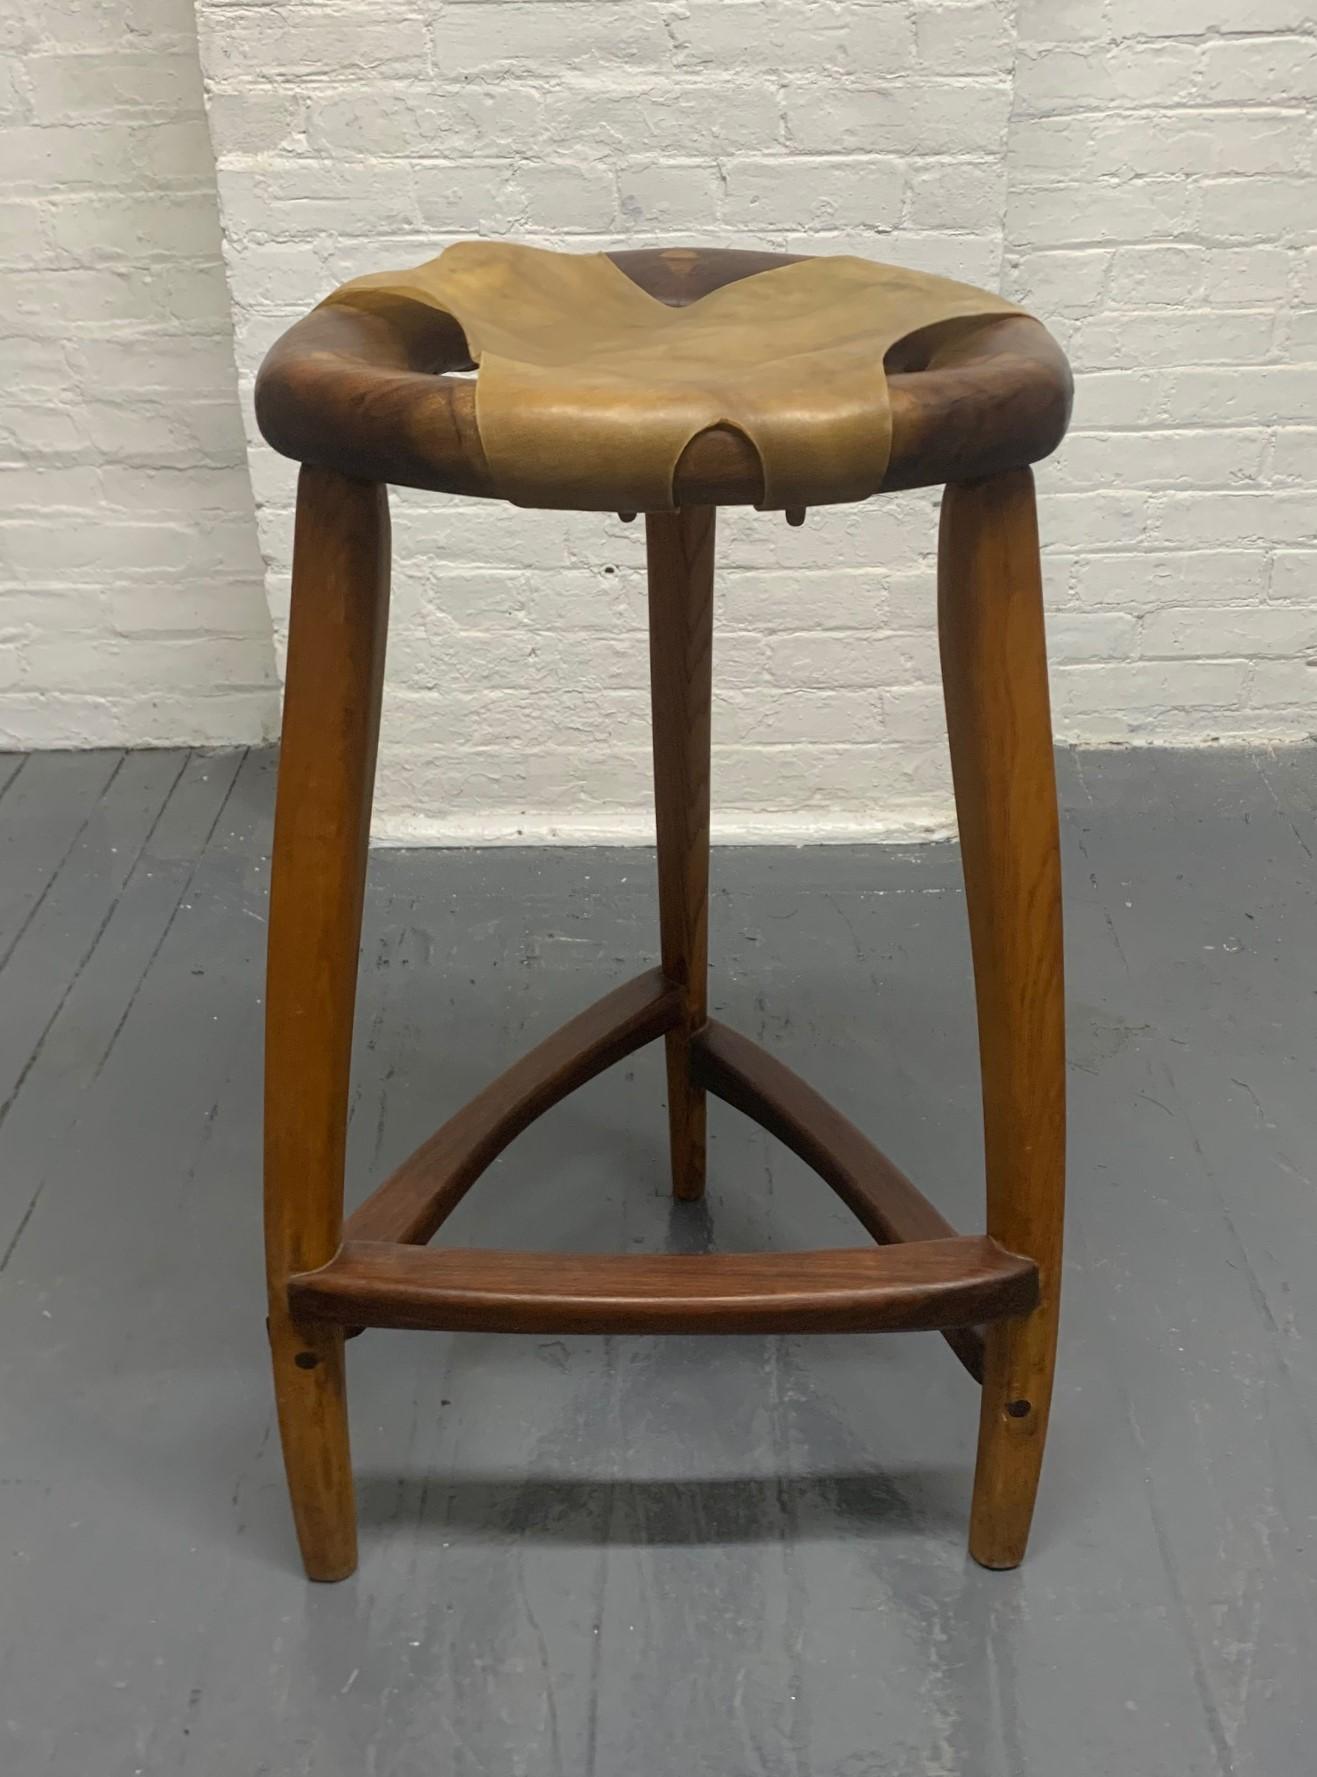 Signed, Arthur Espenet carpenter (American, 1920-2006)
Rare, Rawhide stool, circa 1972. Rawhide stool was made through a process known as bent lamination,” in which the seat frame and legs were built up of several pieces of wood glued together and